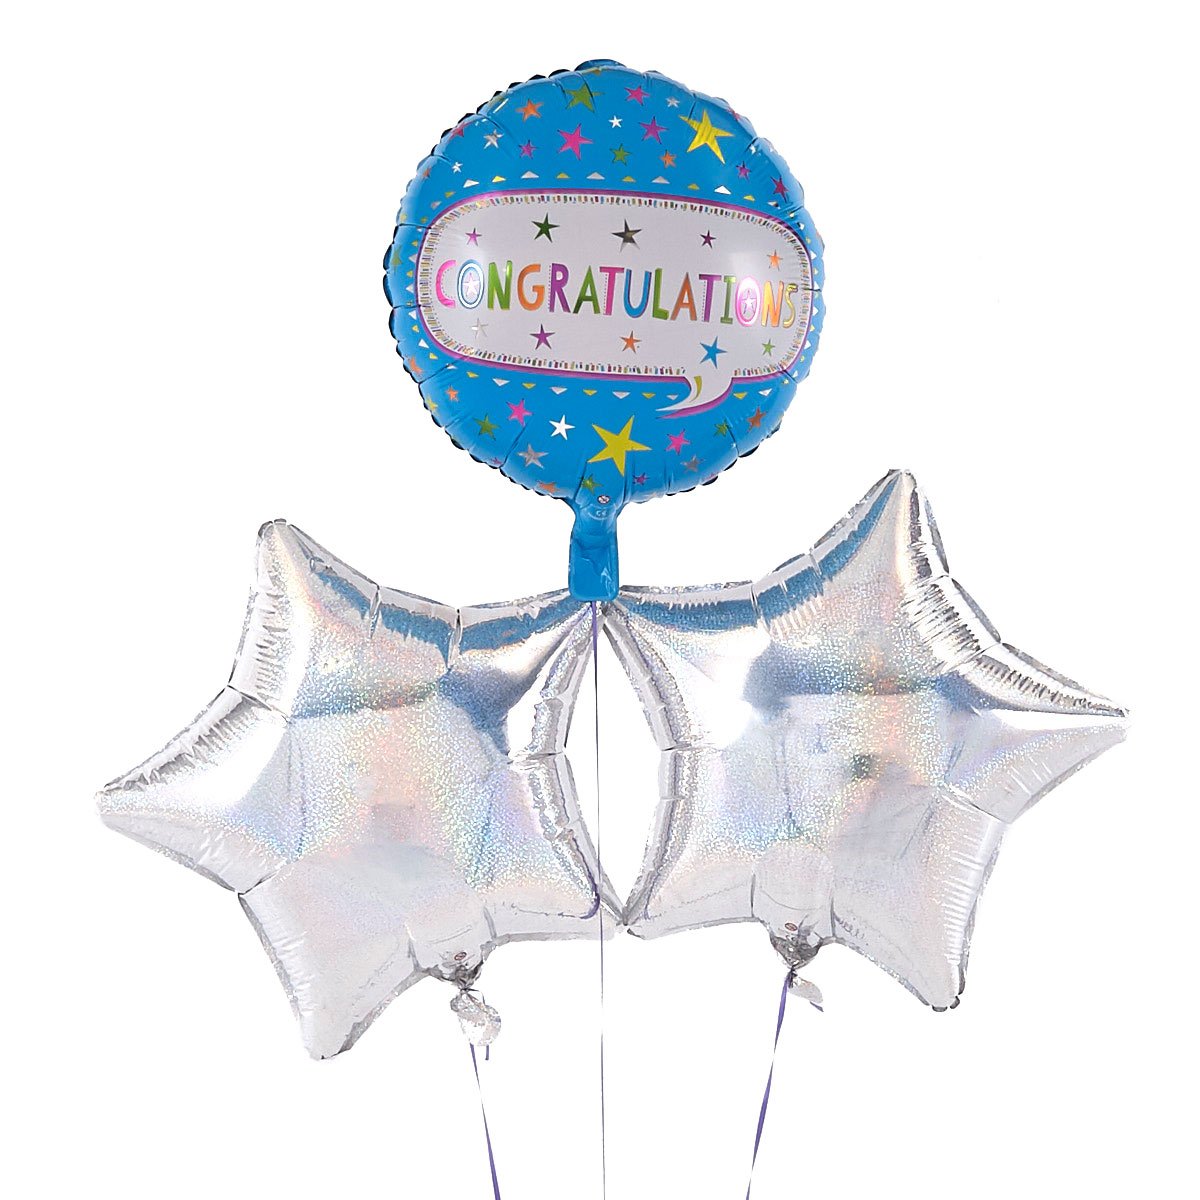 Congratulations Blue Balloon with Silver Balloon Bouquet - DELIVERED INFLATED!